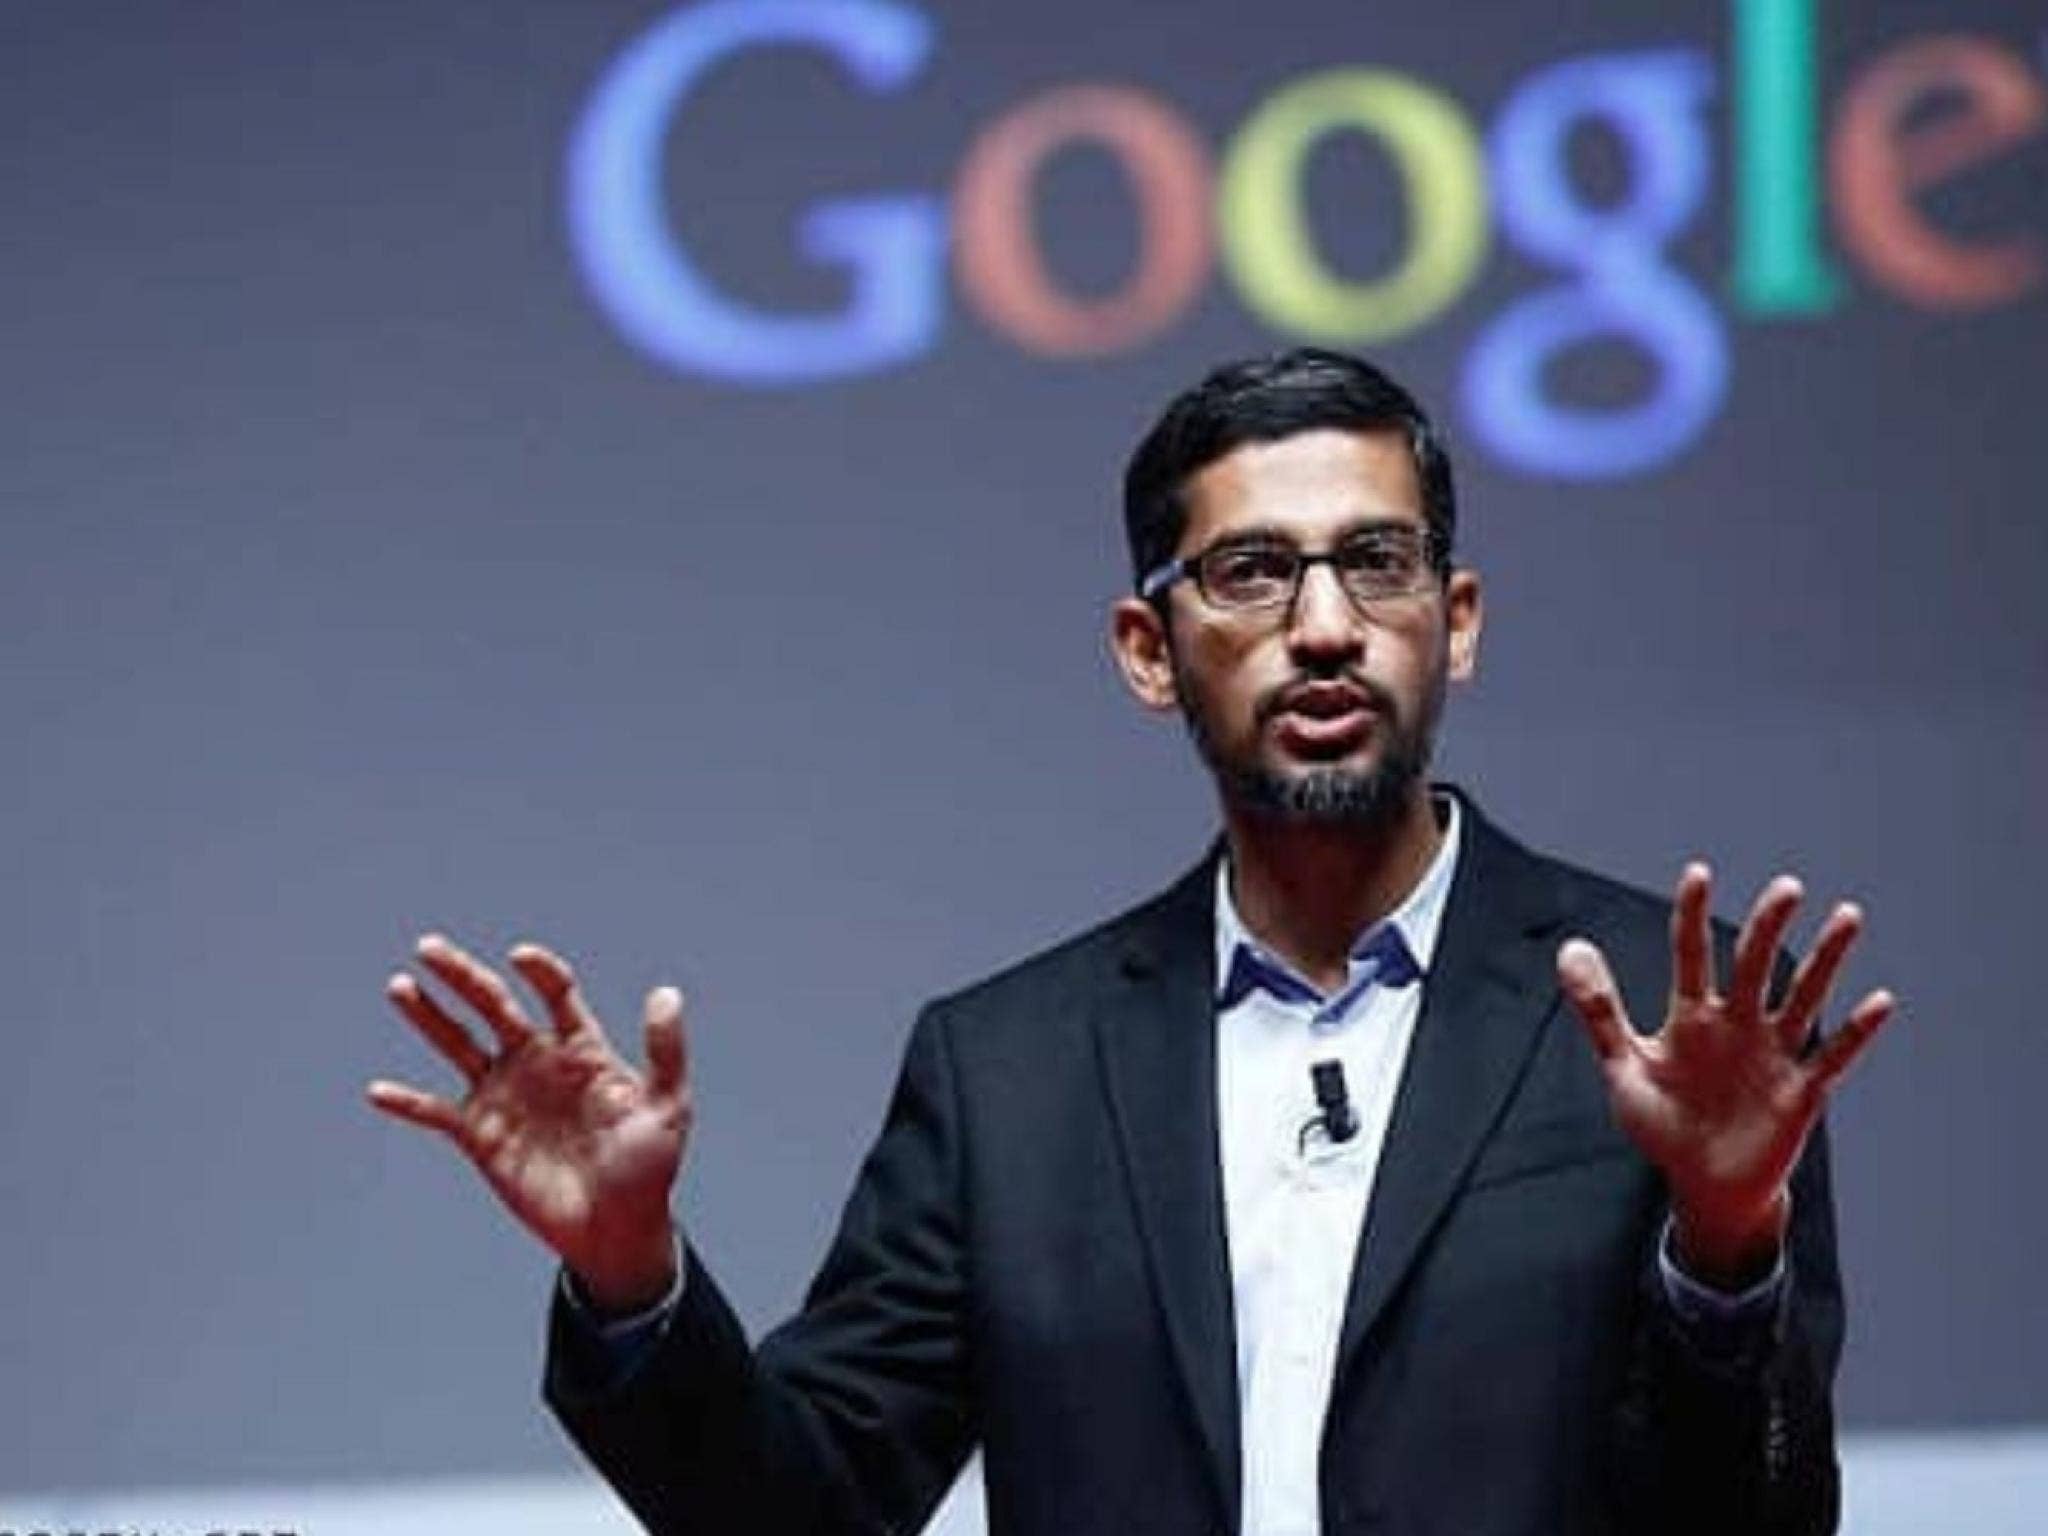 Google Executives Threaten Workers With Layoffs, Say 'There Will Be Blood On The Streets': Report